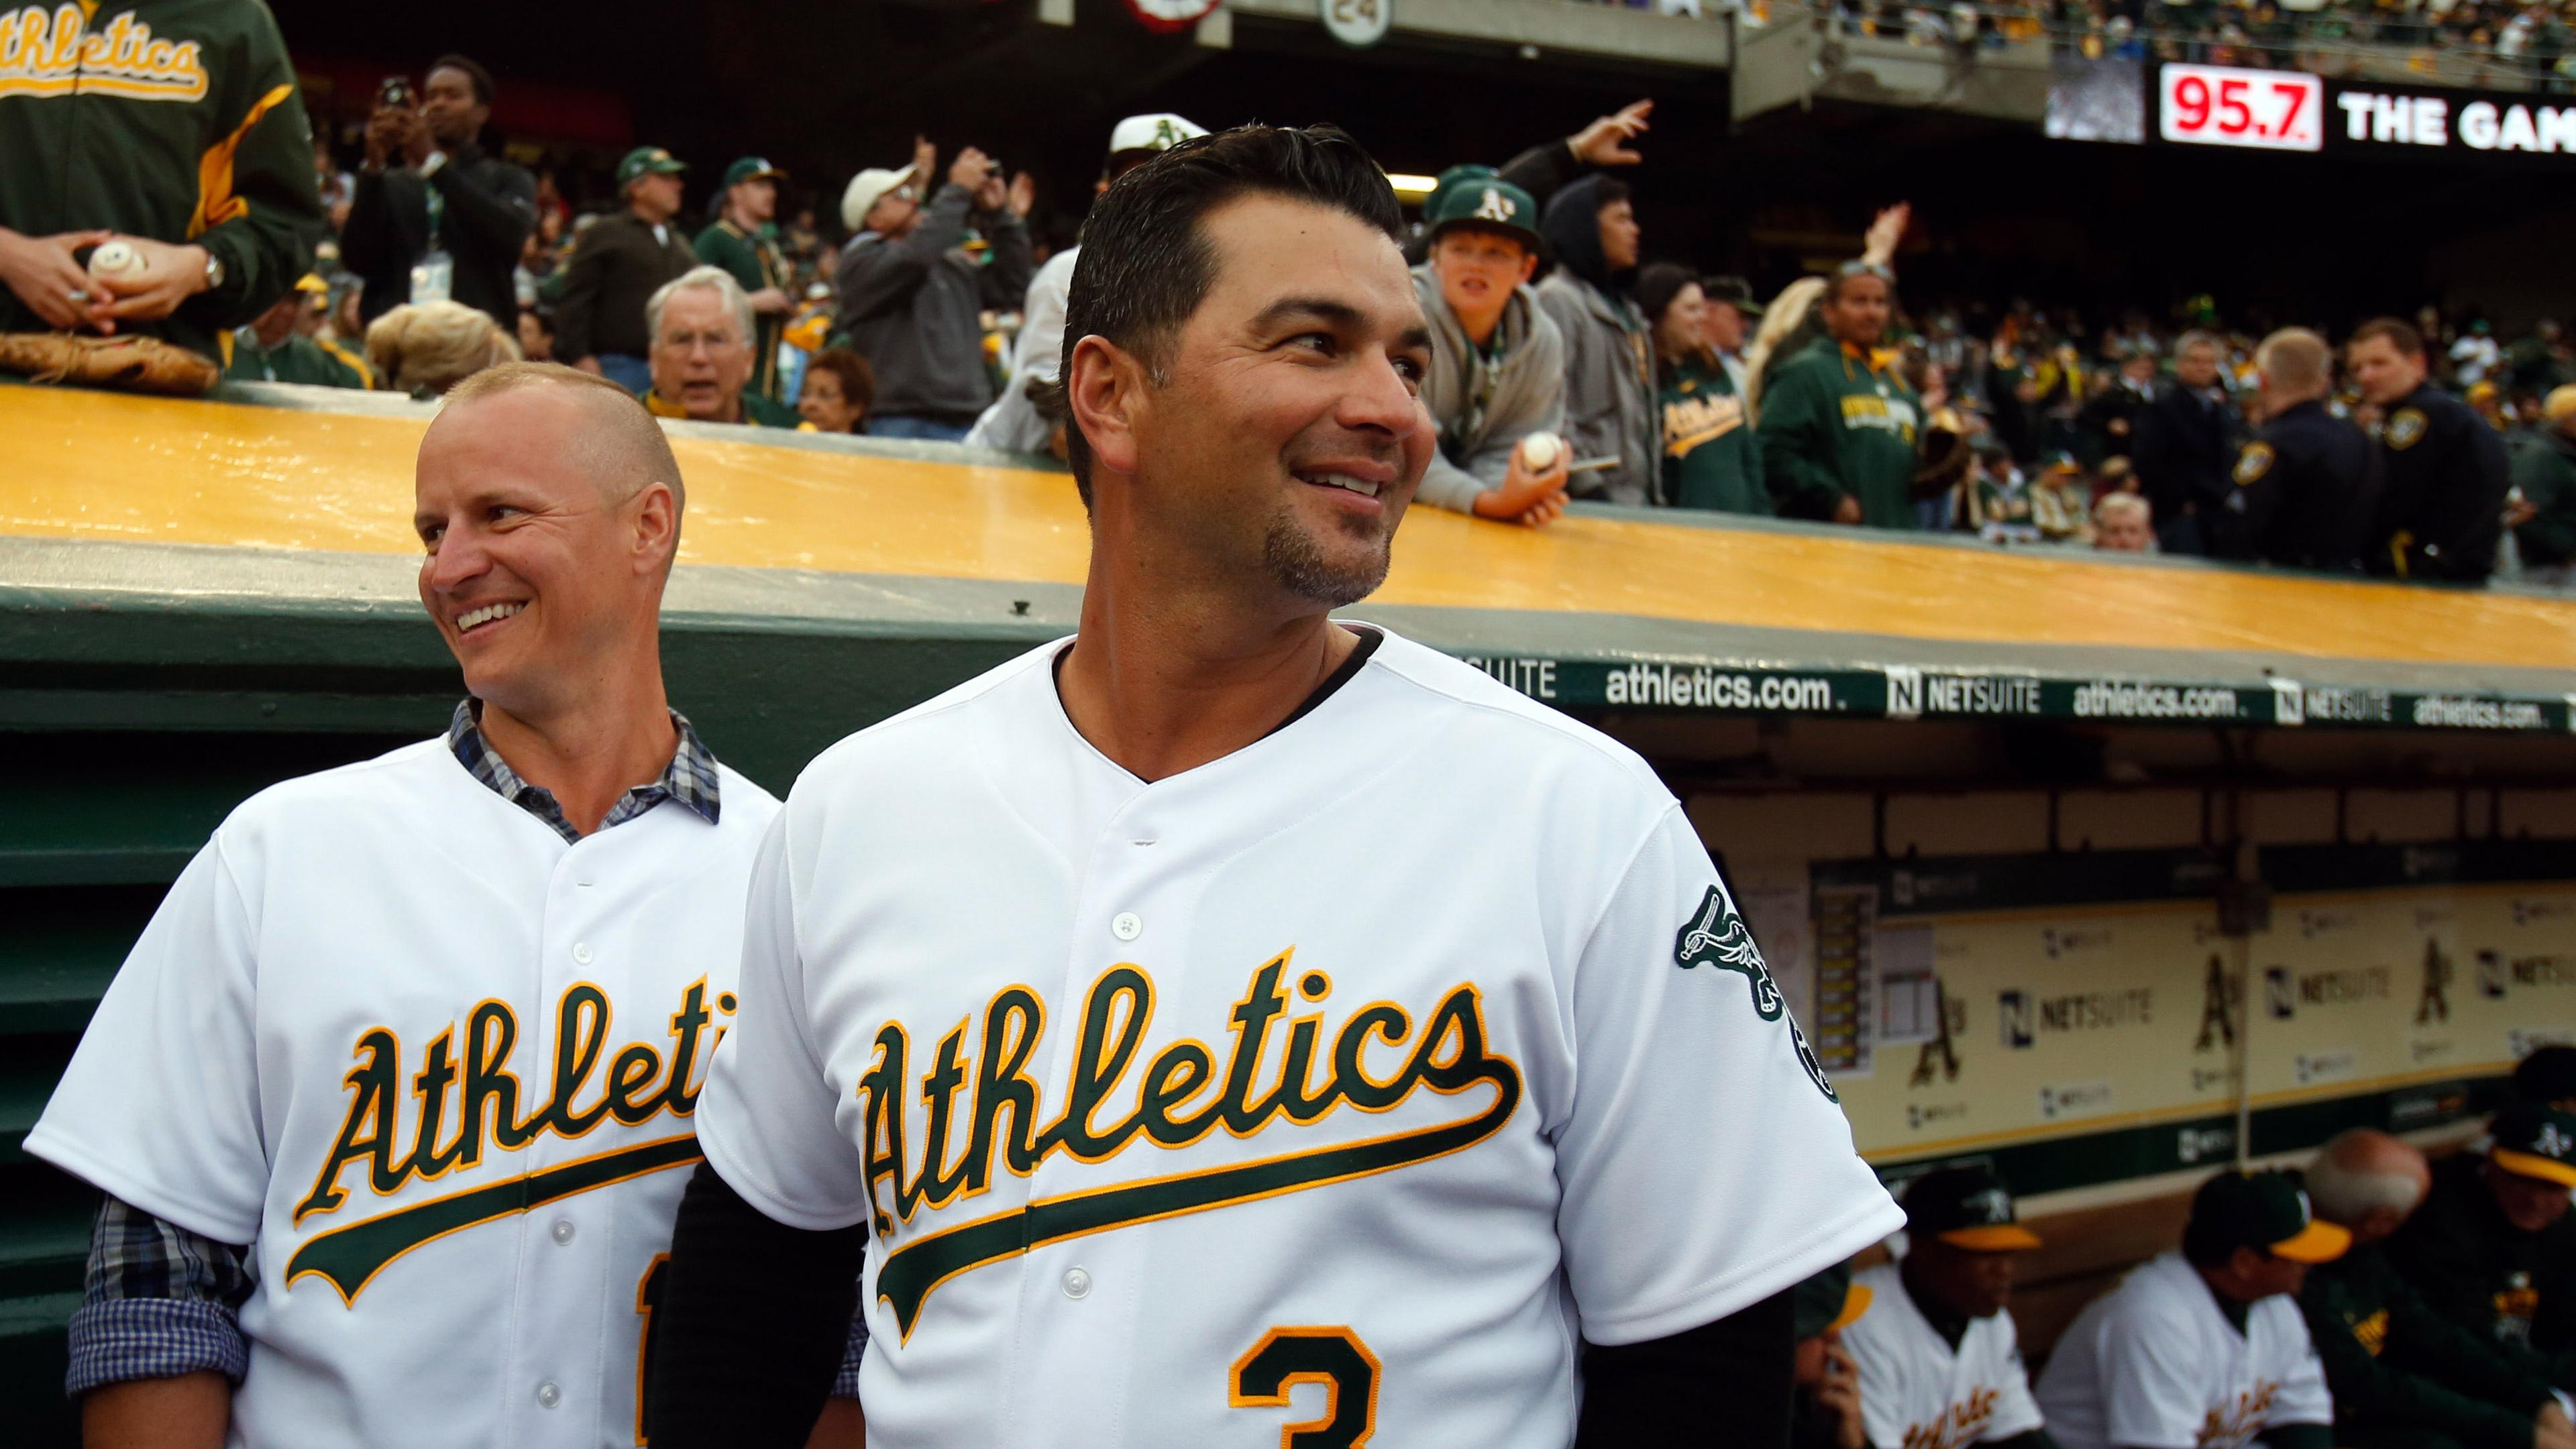 Apr 6, 2015; Oakland, CA, USA; Oakland Athletics former players Mark Ellis and Eric Chavez before the game against the Texas Rangers at O.co Coliseum. / Kelley L Cox-USA TODAY Sports